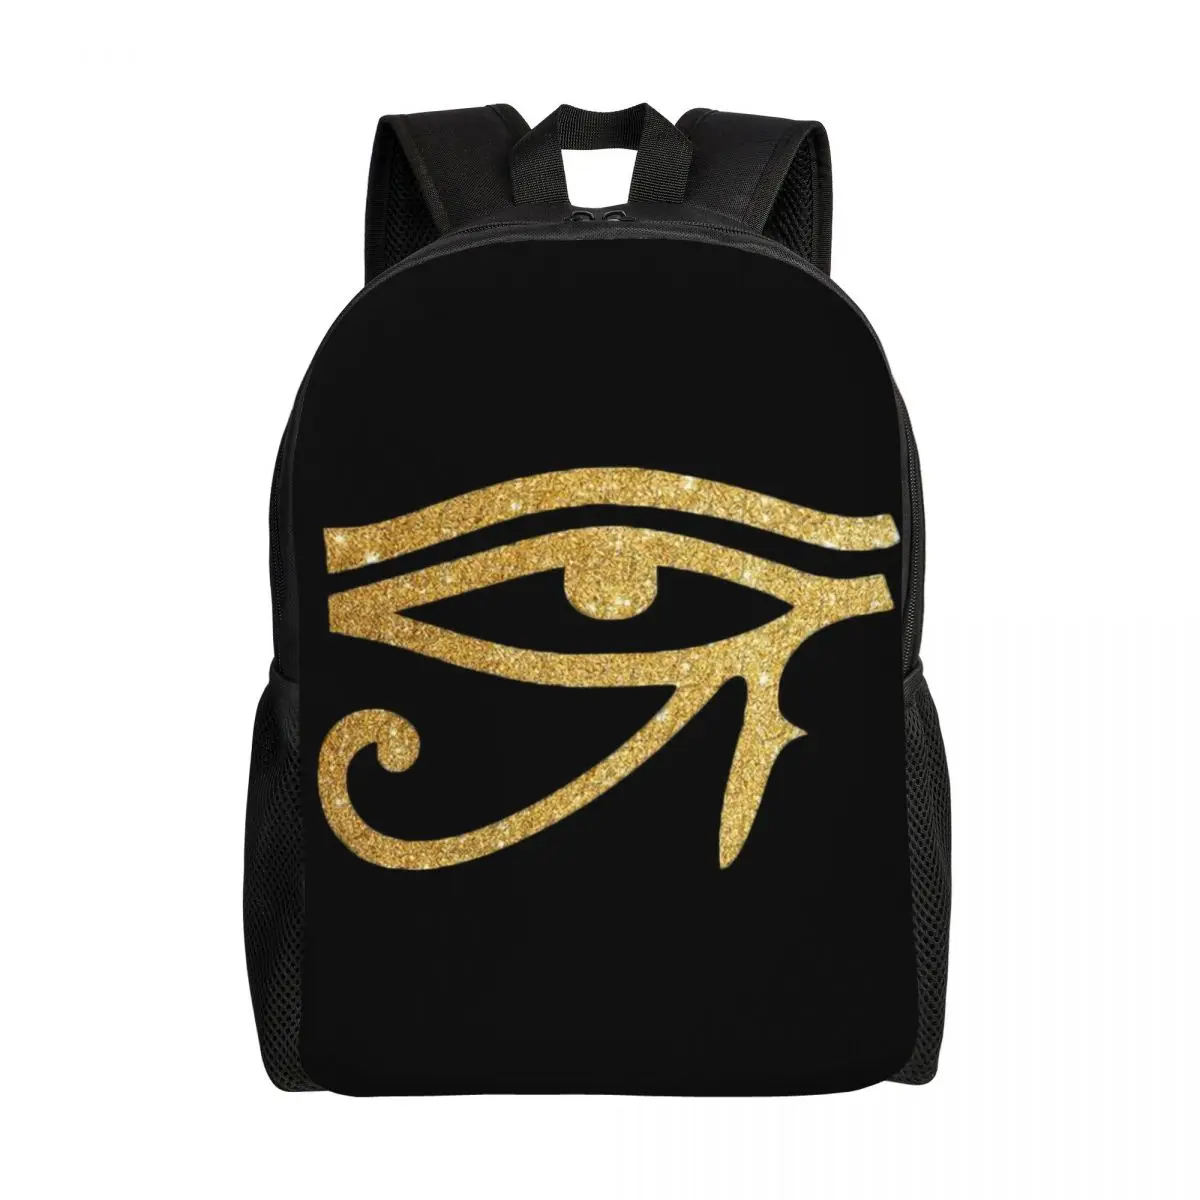 

Egypt Eye Of Horus Backpack for Girls Boys Ancient Egyptian Culture College School Travel Bags Bookbag Fits 15 Inch Laptop